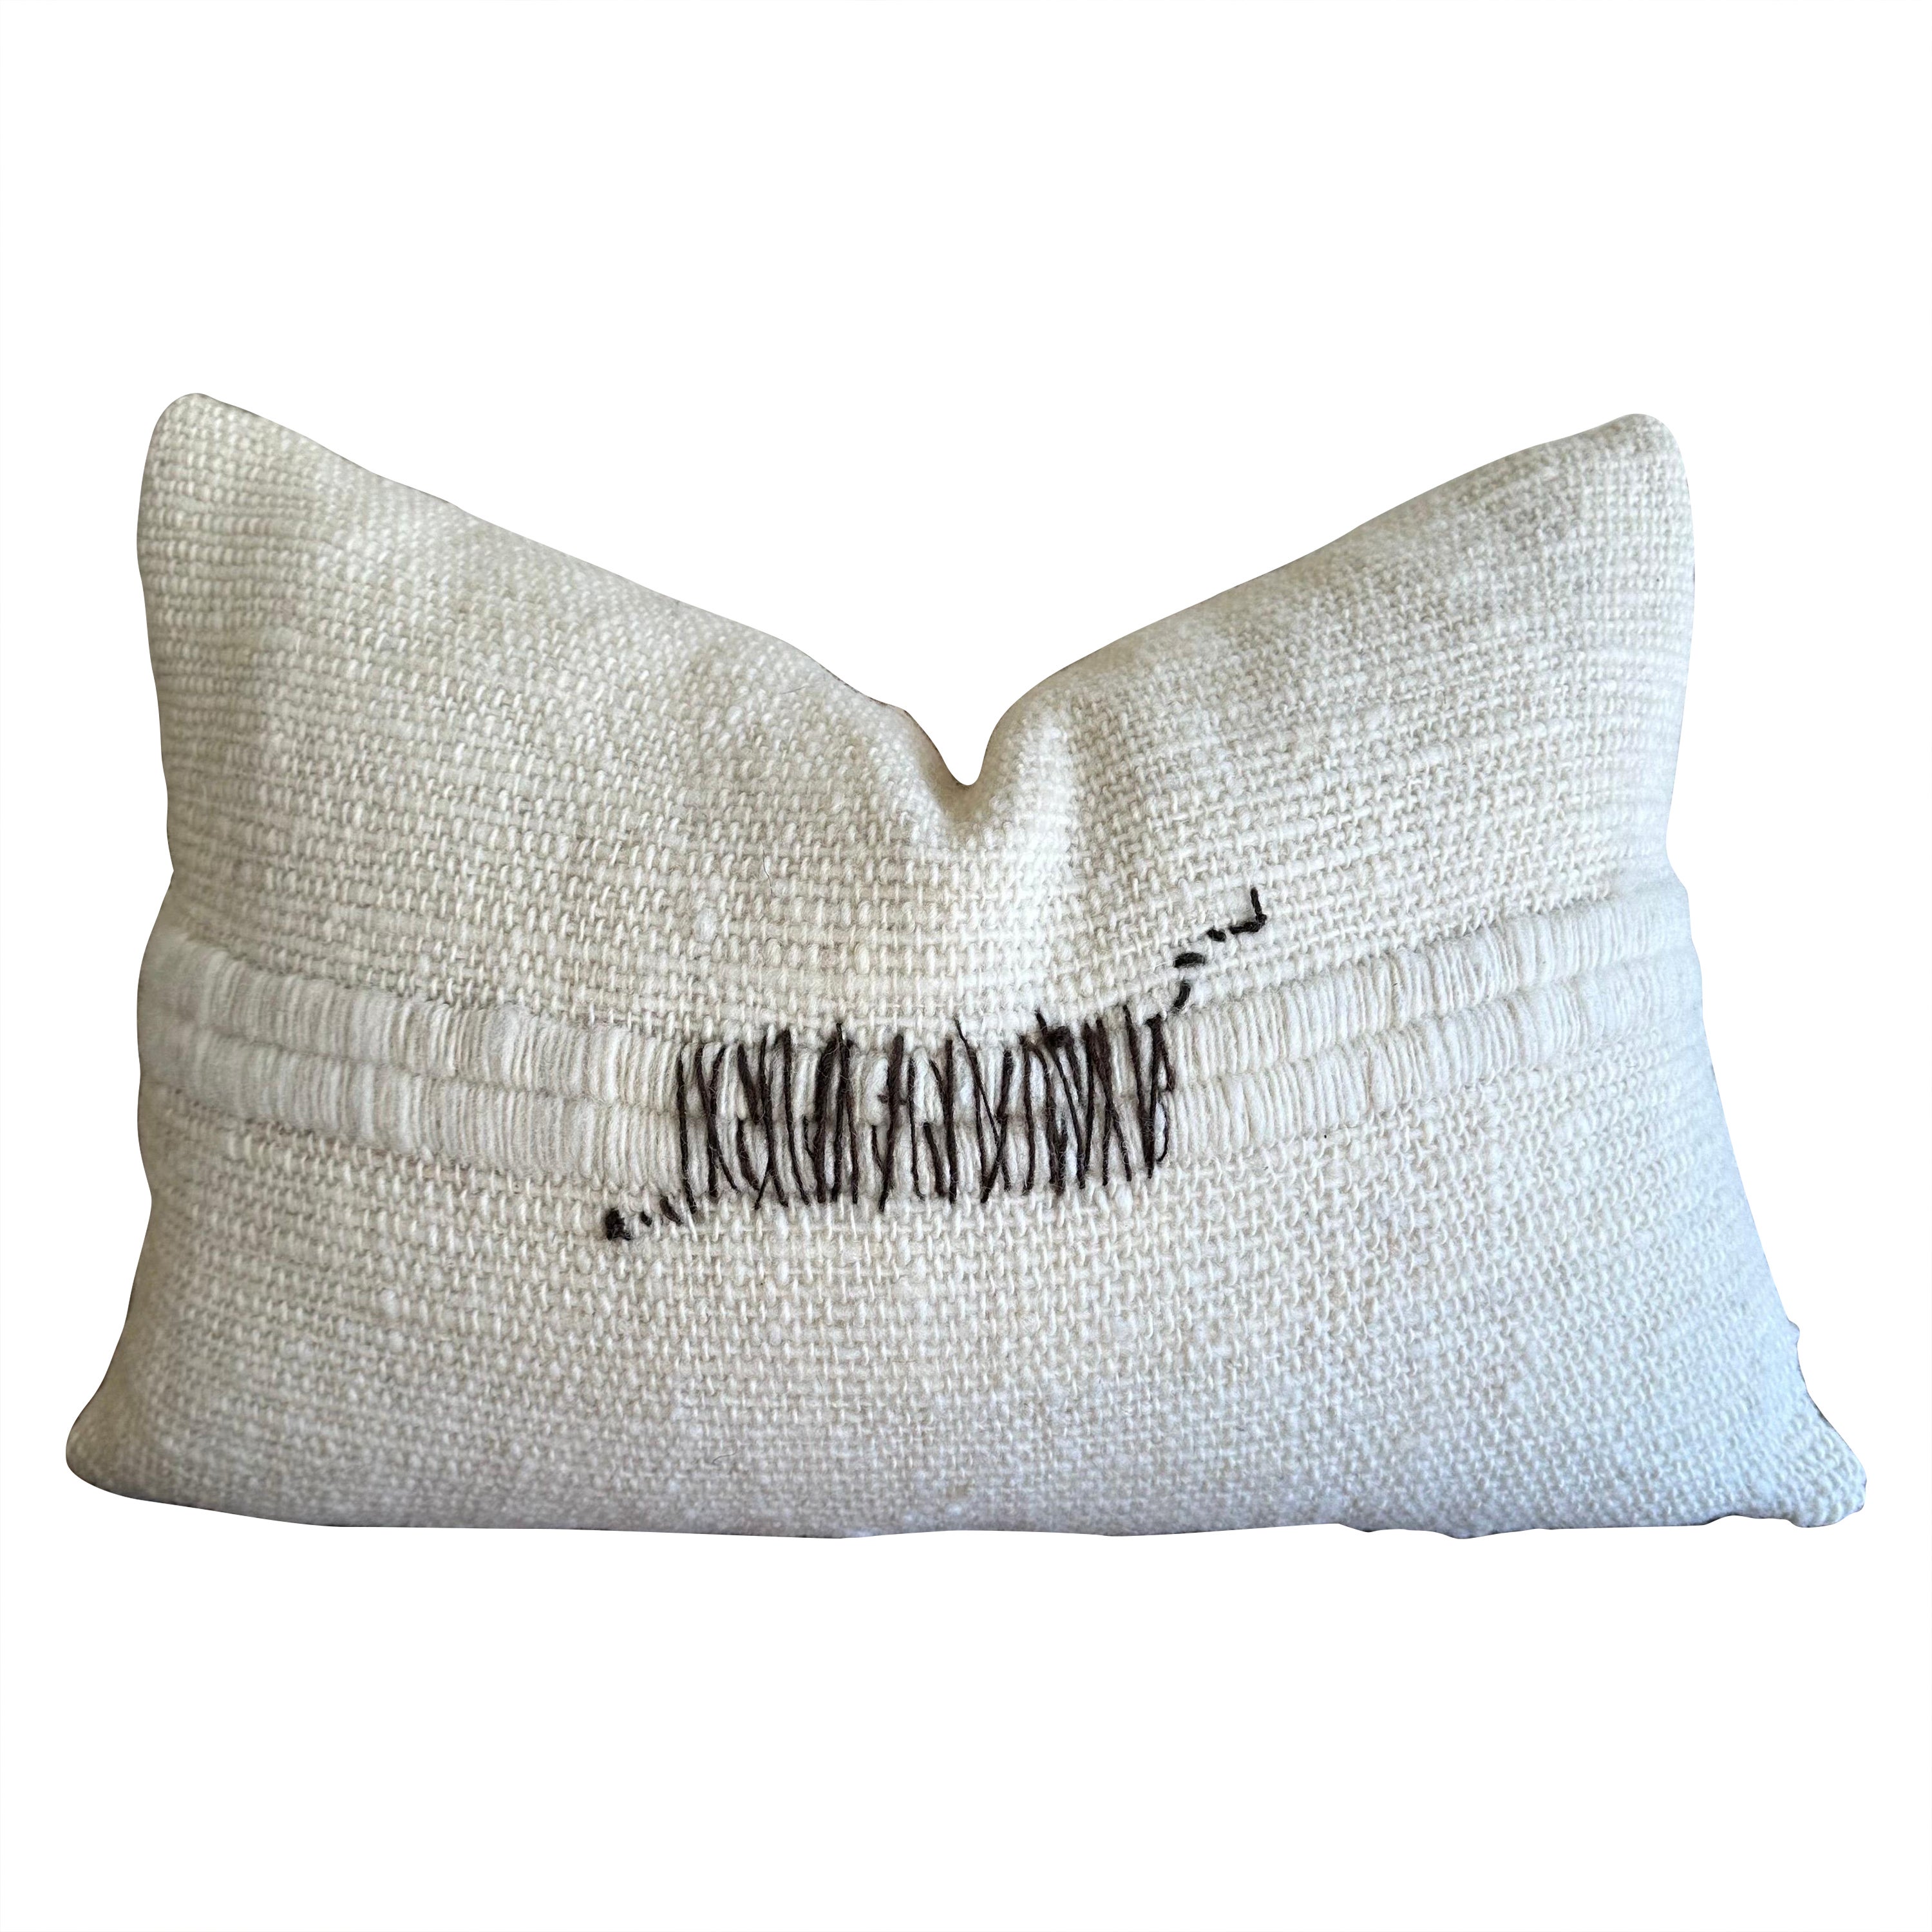 Nikko Hand Made Wool Pillow with Zig Zag Stitching For Sale